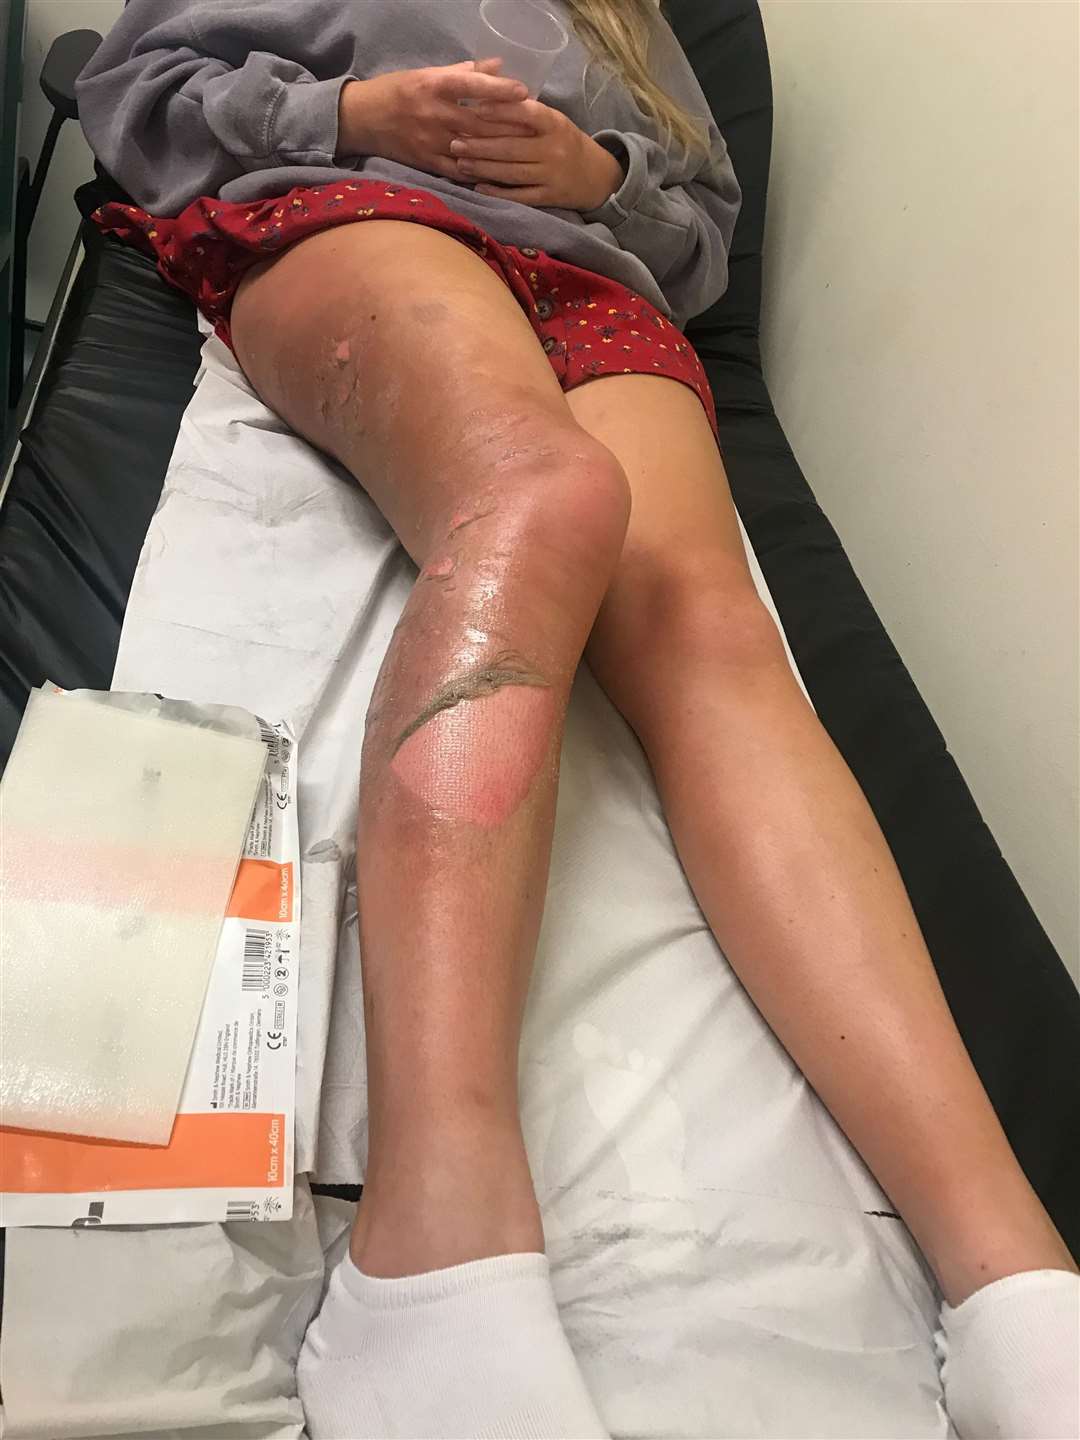 Leone suffered severe burns on her legs. Image: Leone Cook